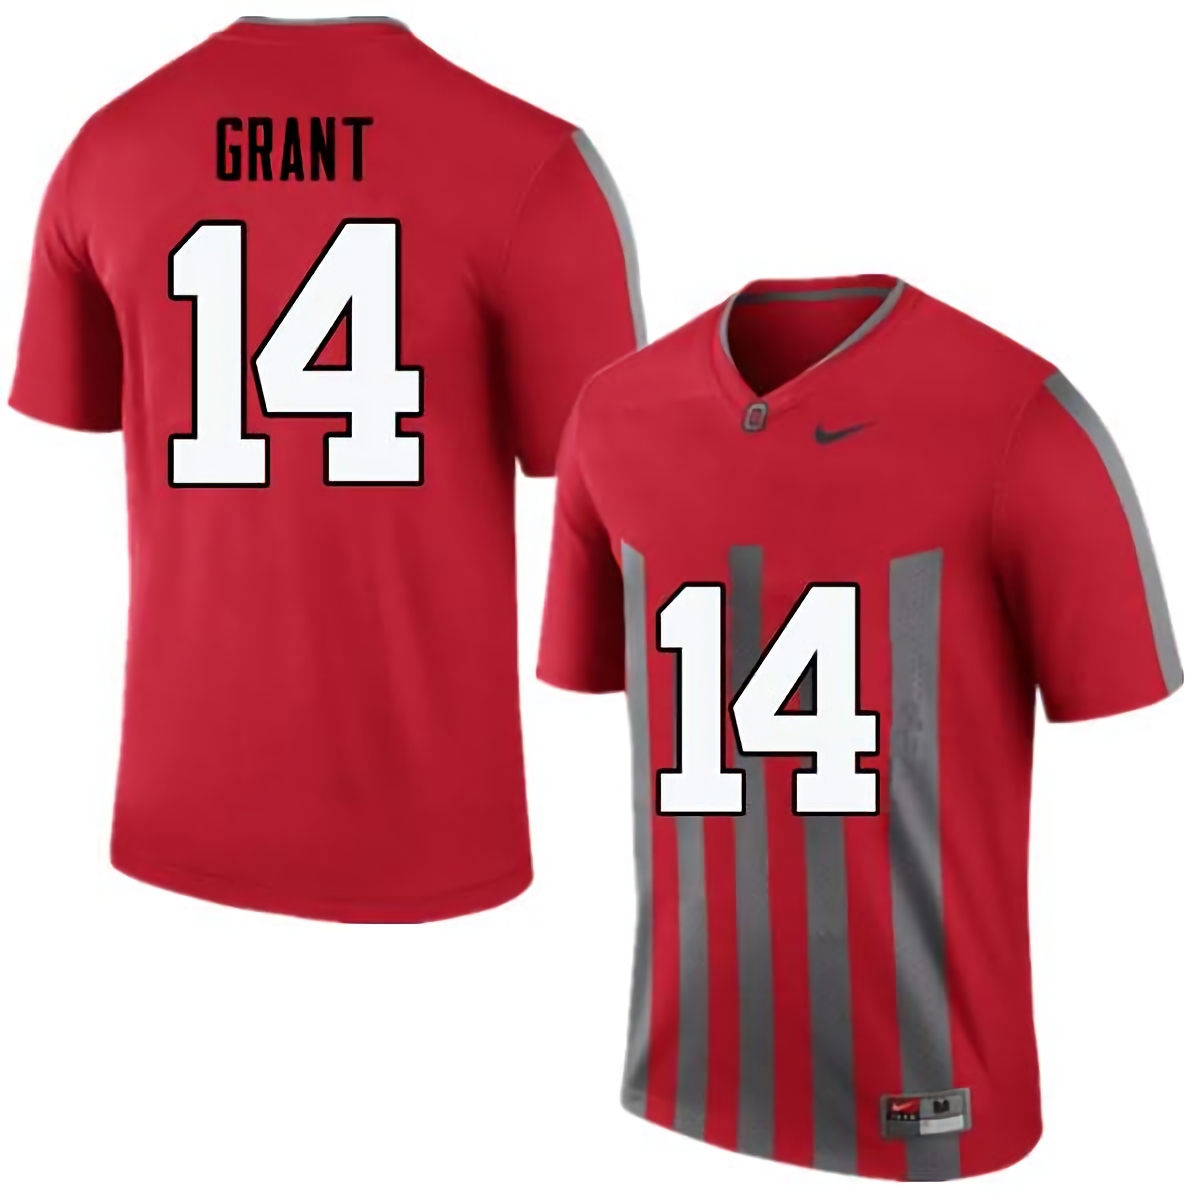 Curtis Grant Ohio State Buckeyes Men's NCAA #14 Nike Throwback Red College Stitched Football Jersey DMT1256TZ